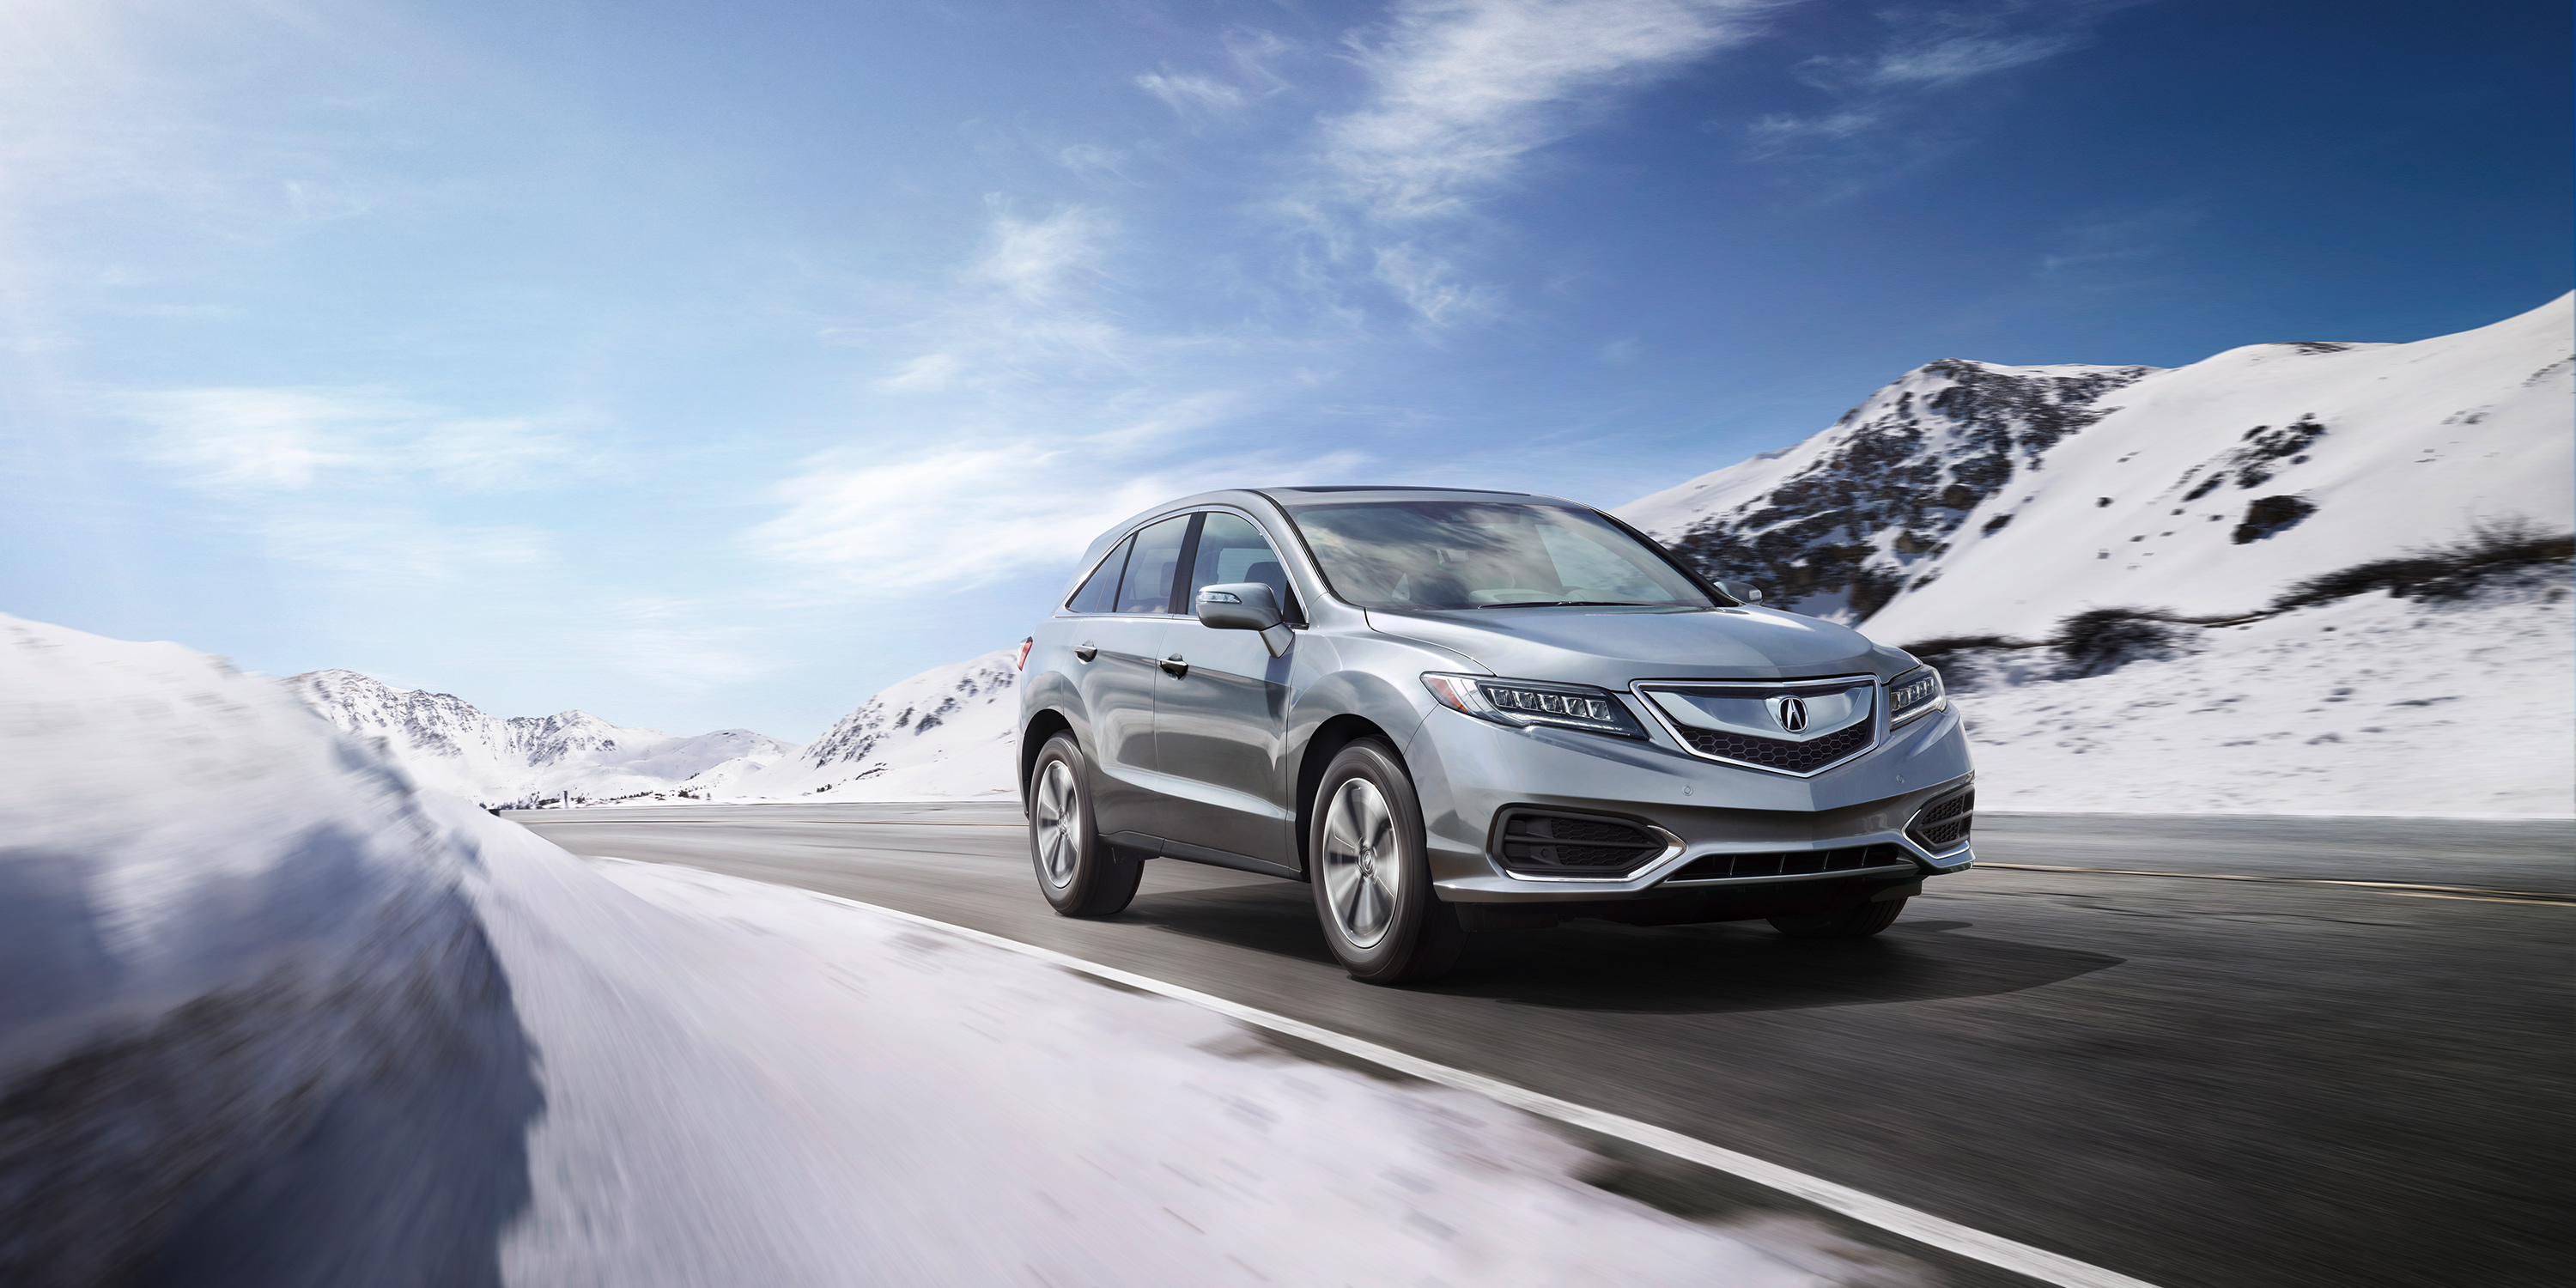 Acura Mdx Snow Mountains Wallpaper In